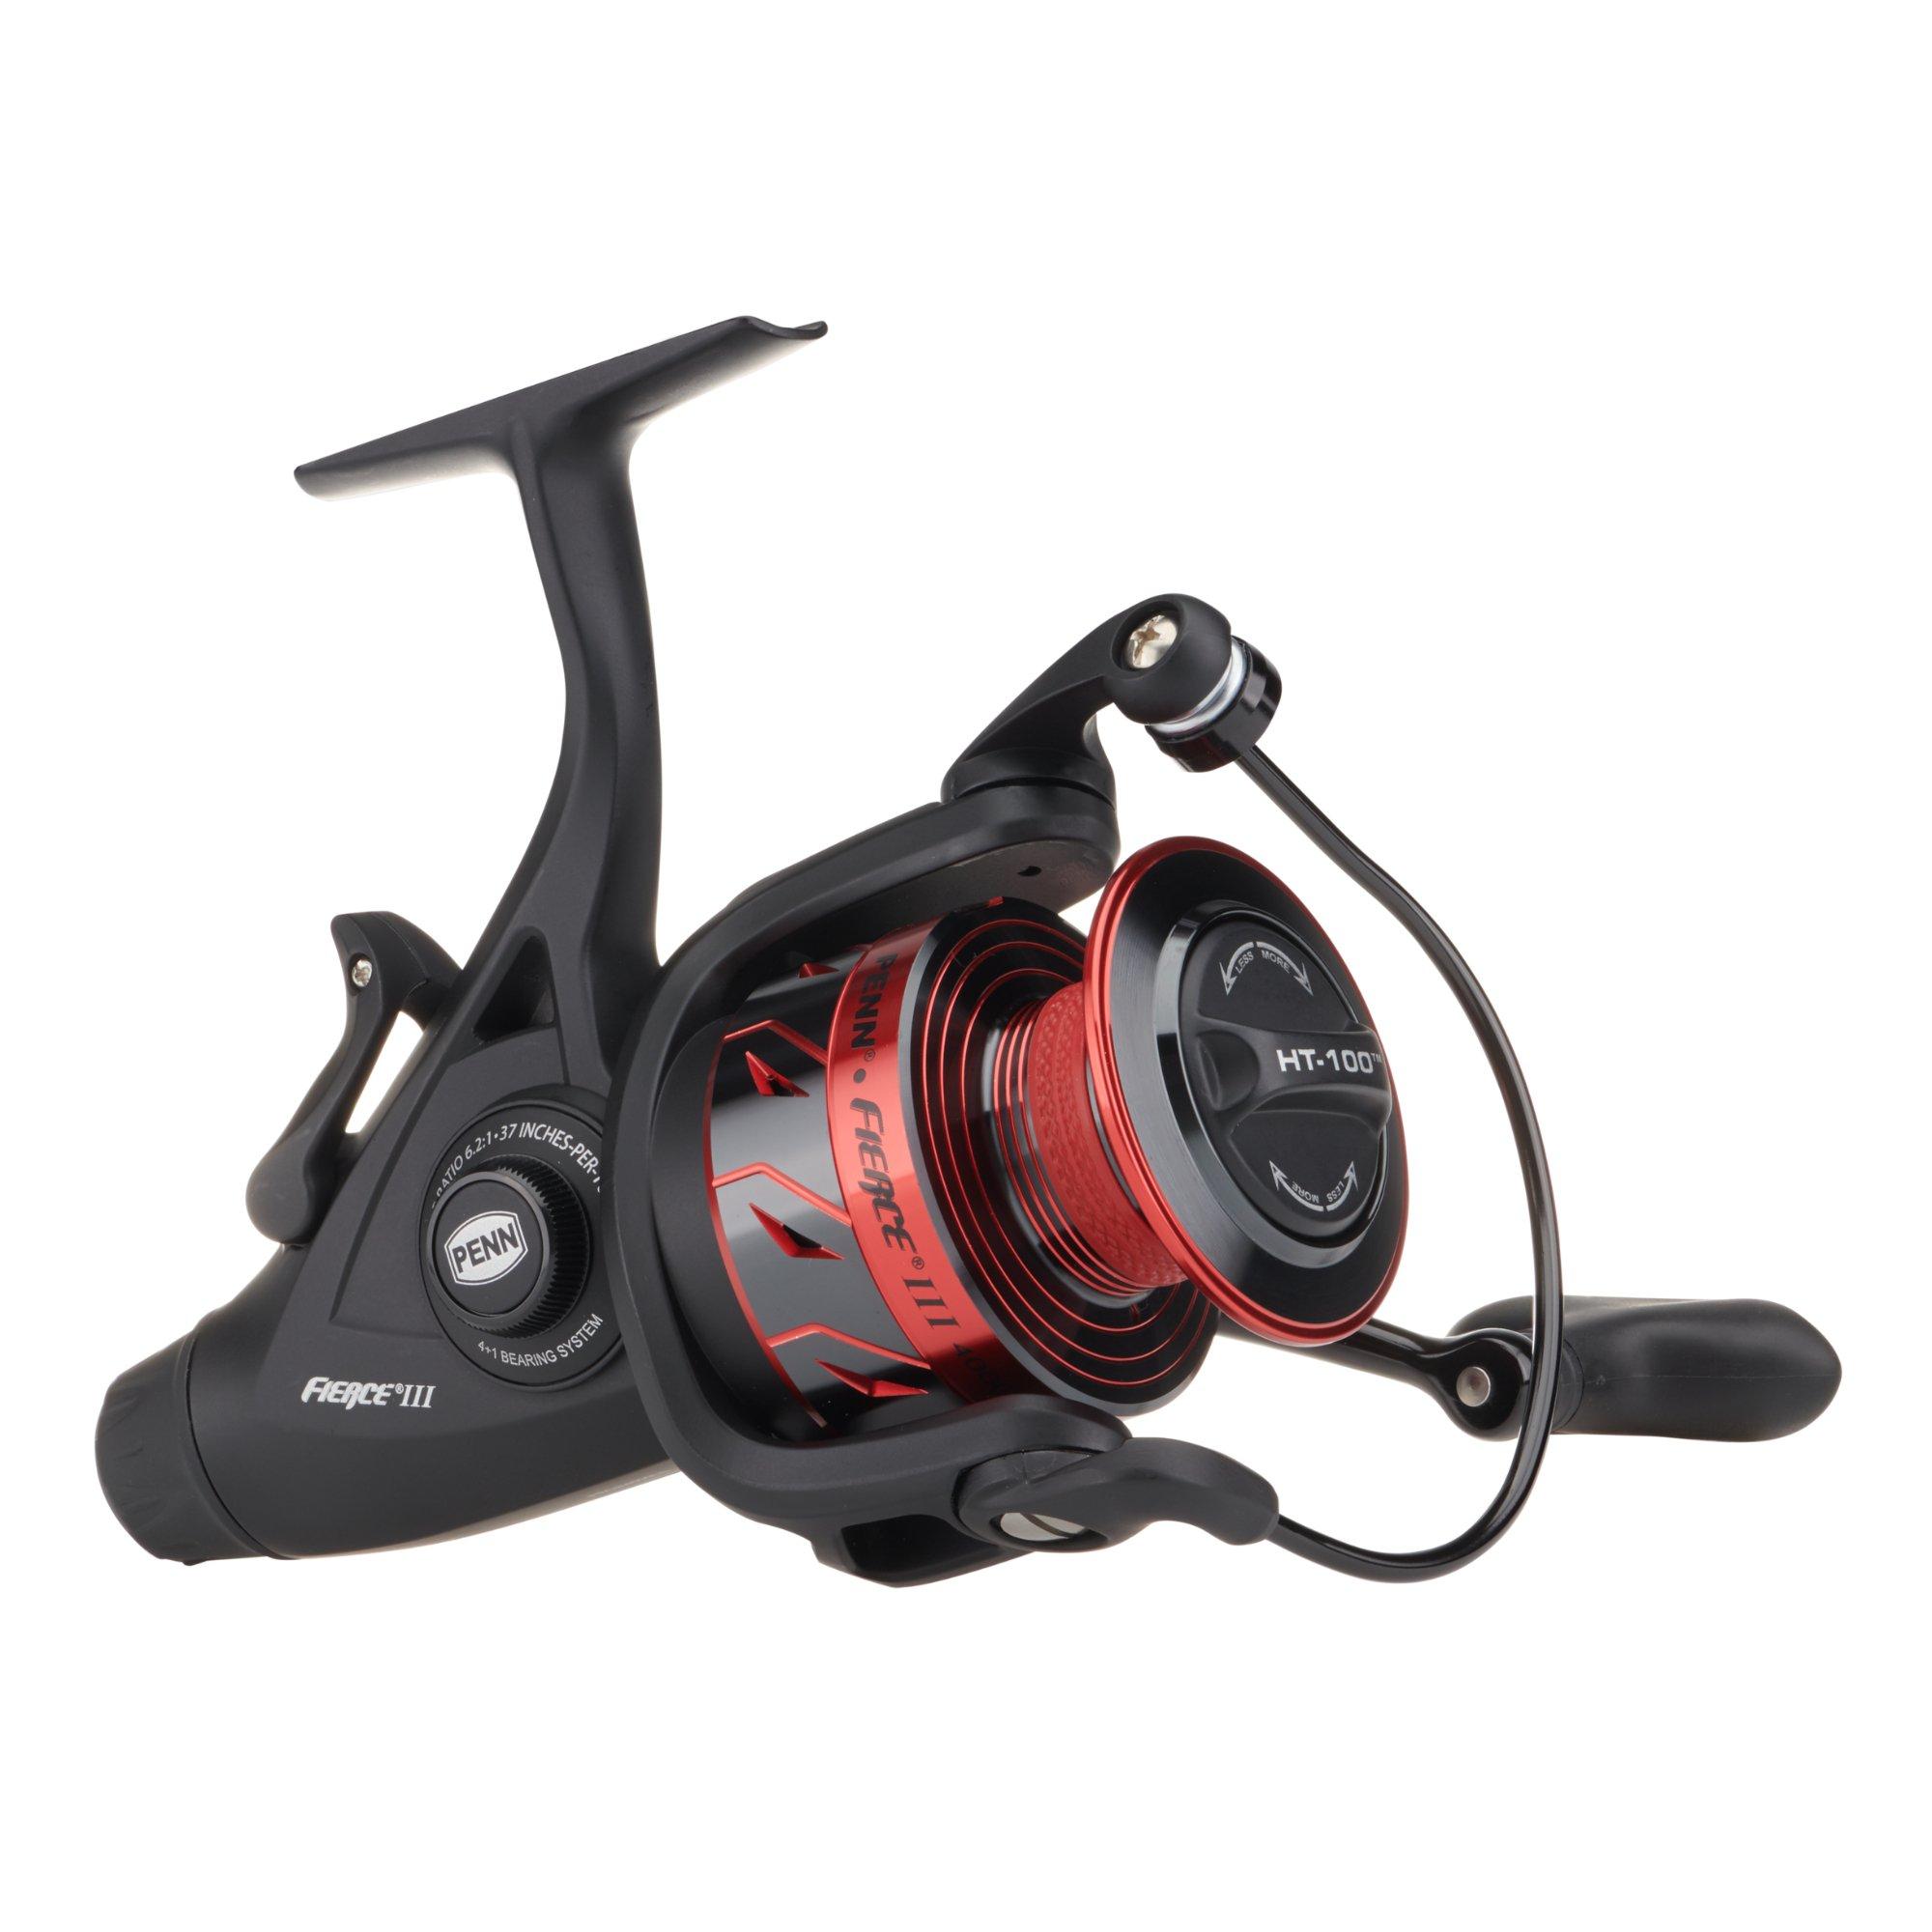 Penn nouvelle bataille III-MK3 Spinning/fishing reel-Toutes Tailles 